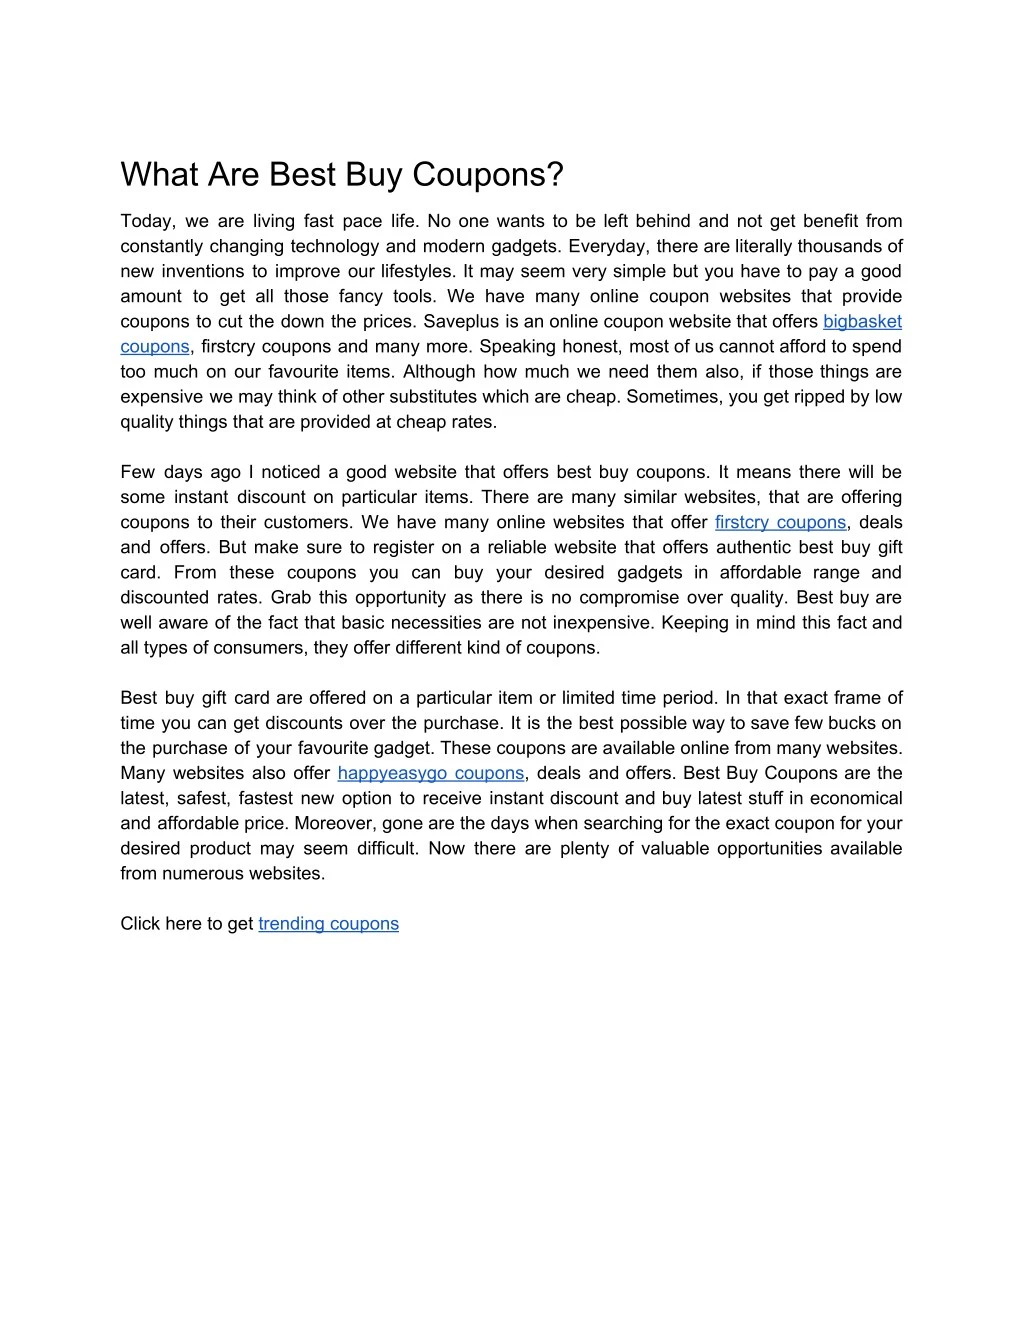 what are best buy coupons